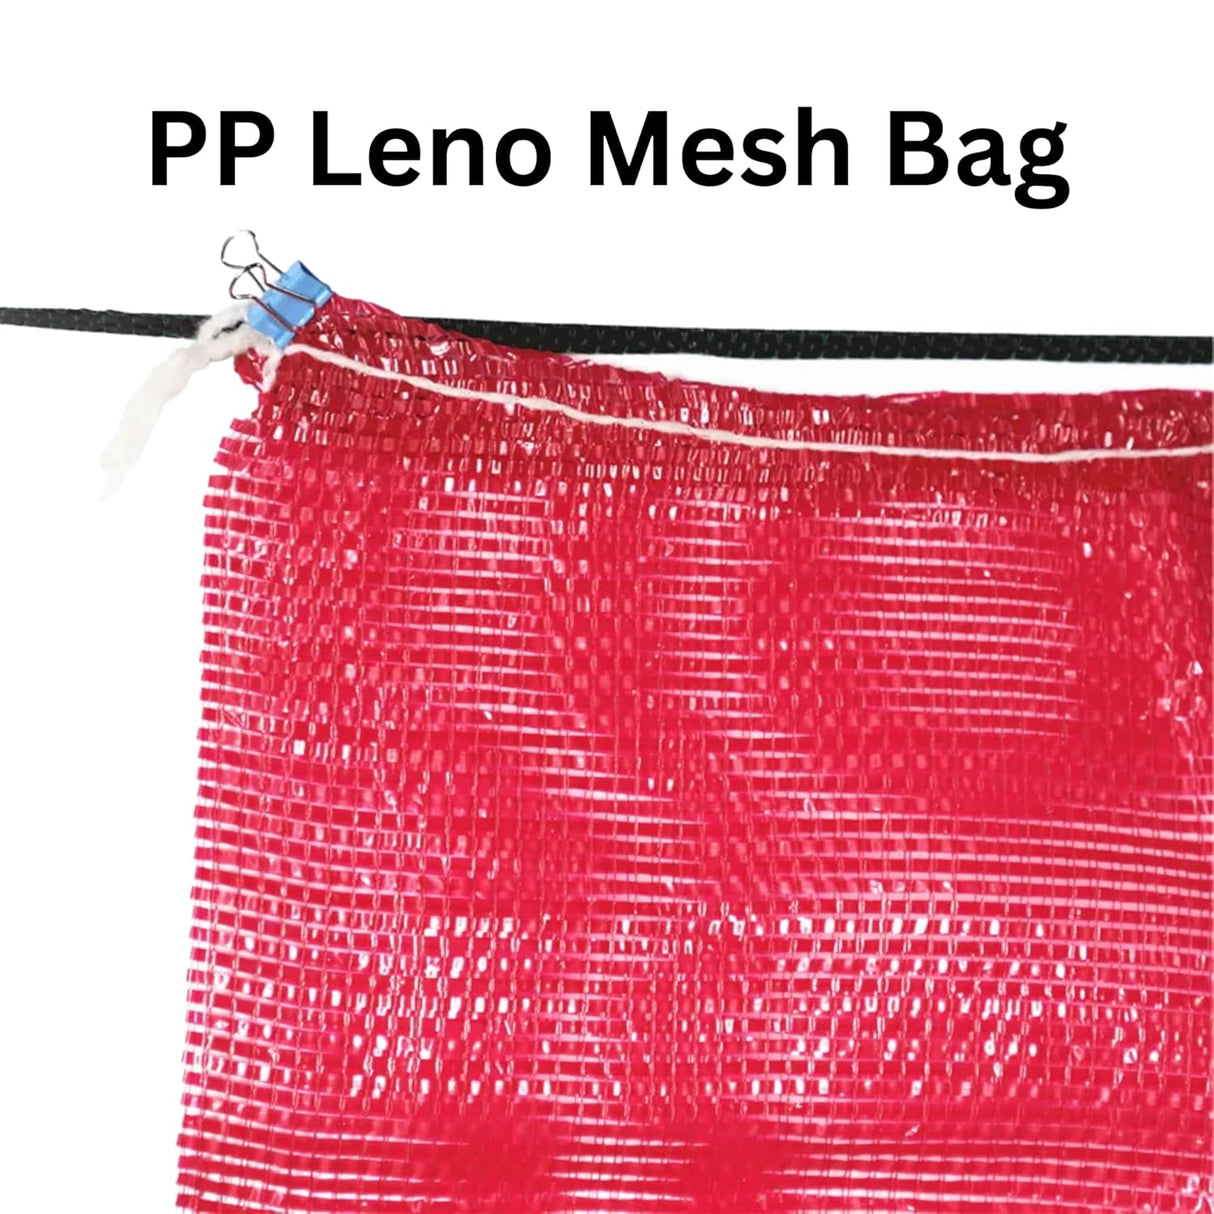 SINGHAL Leno Mesh Storage Produce Bags Reusable for Vegetable Storage Bags Onion Storage Washable Net Bags (14x26 Inch - Yellow, 10)